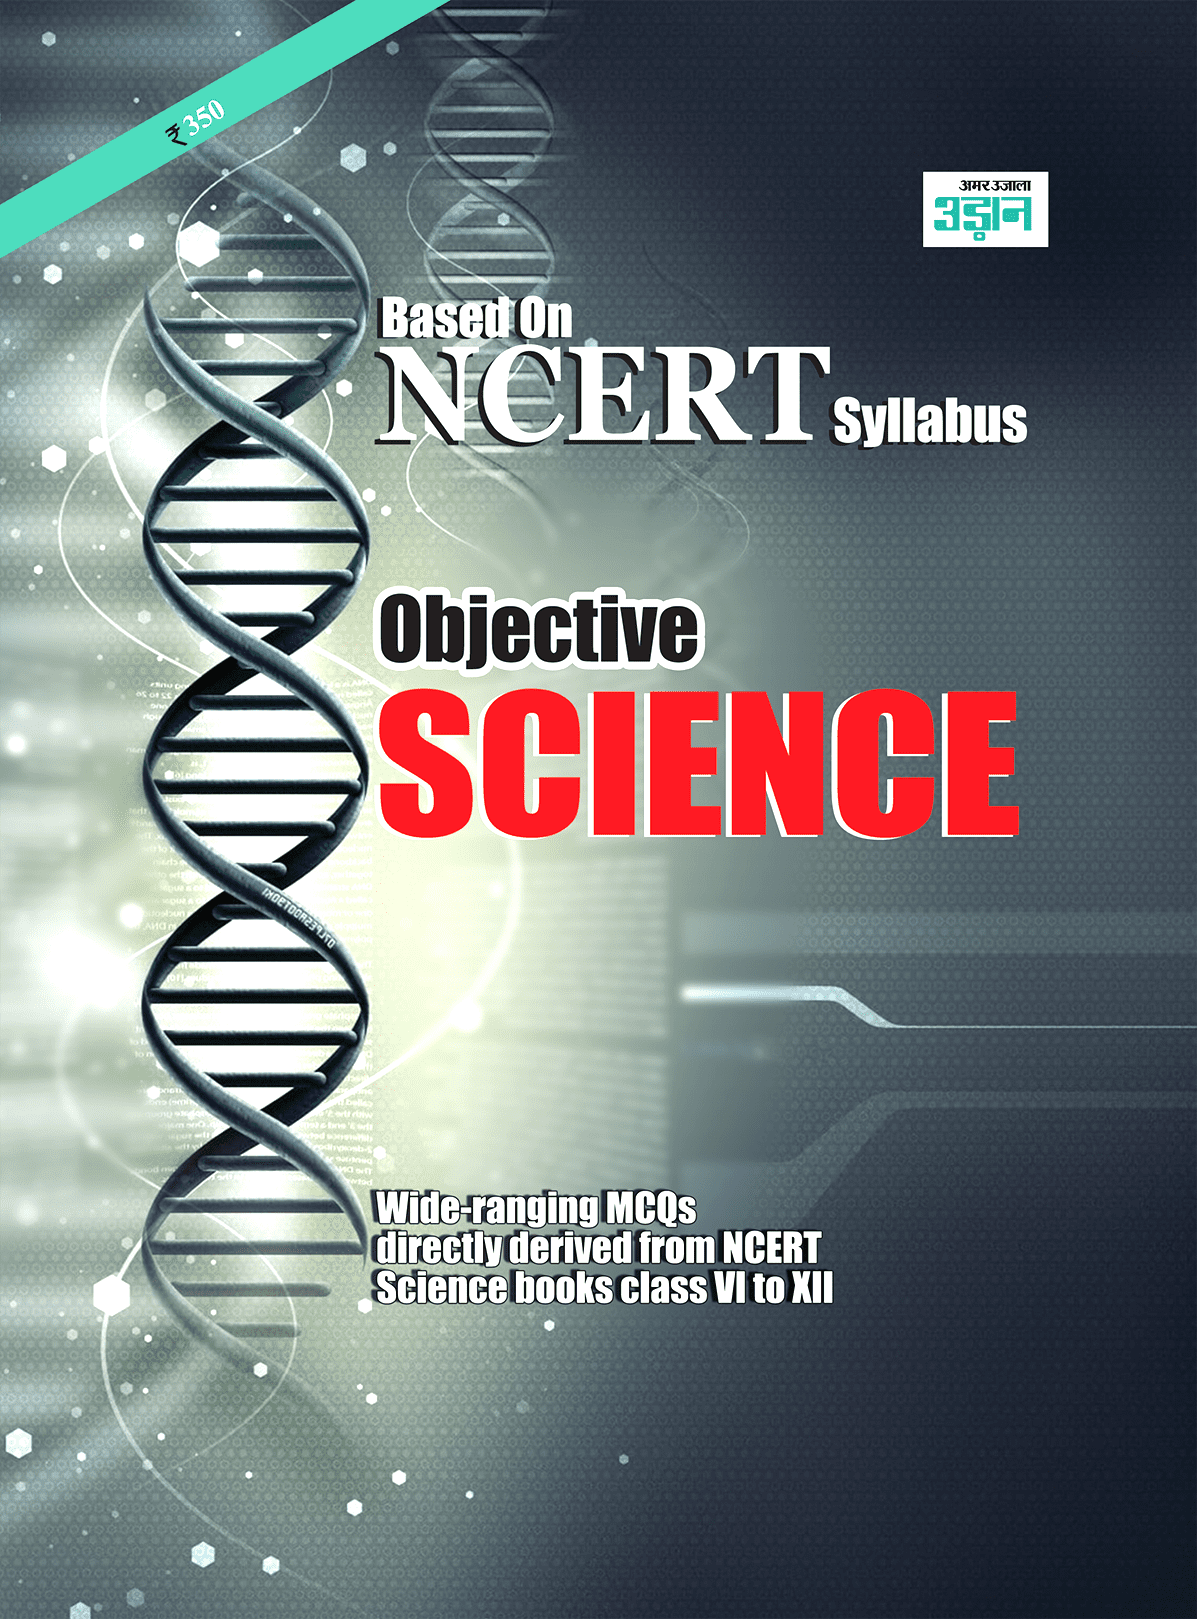 NCERT-SCIENCE BOOK COVER (1)